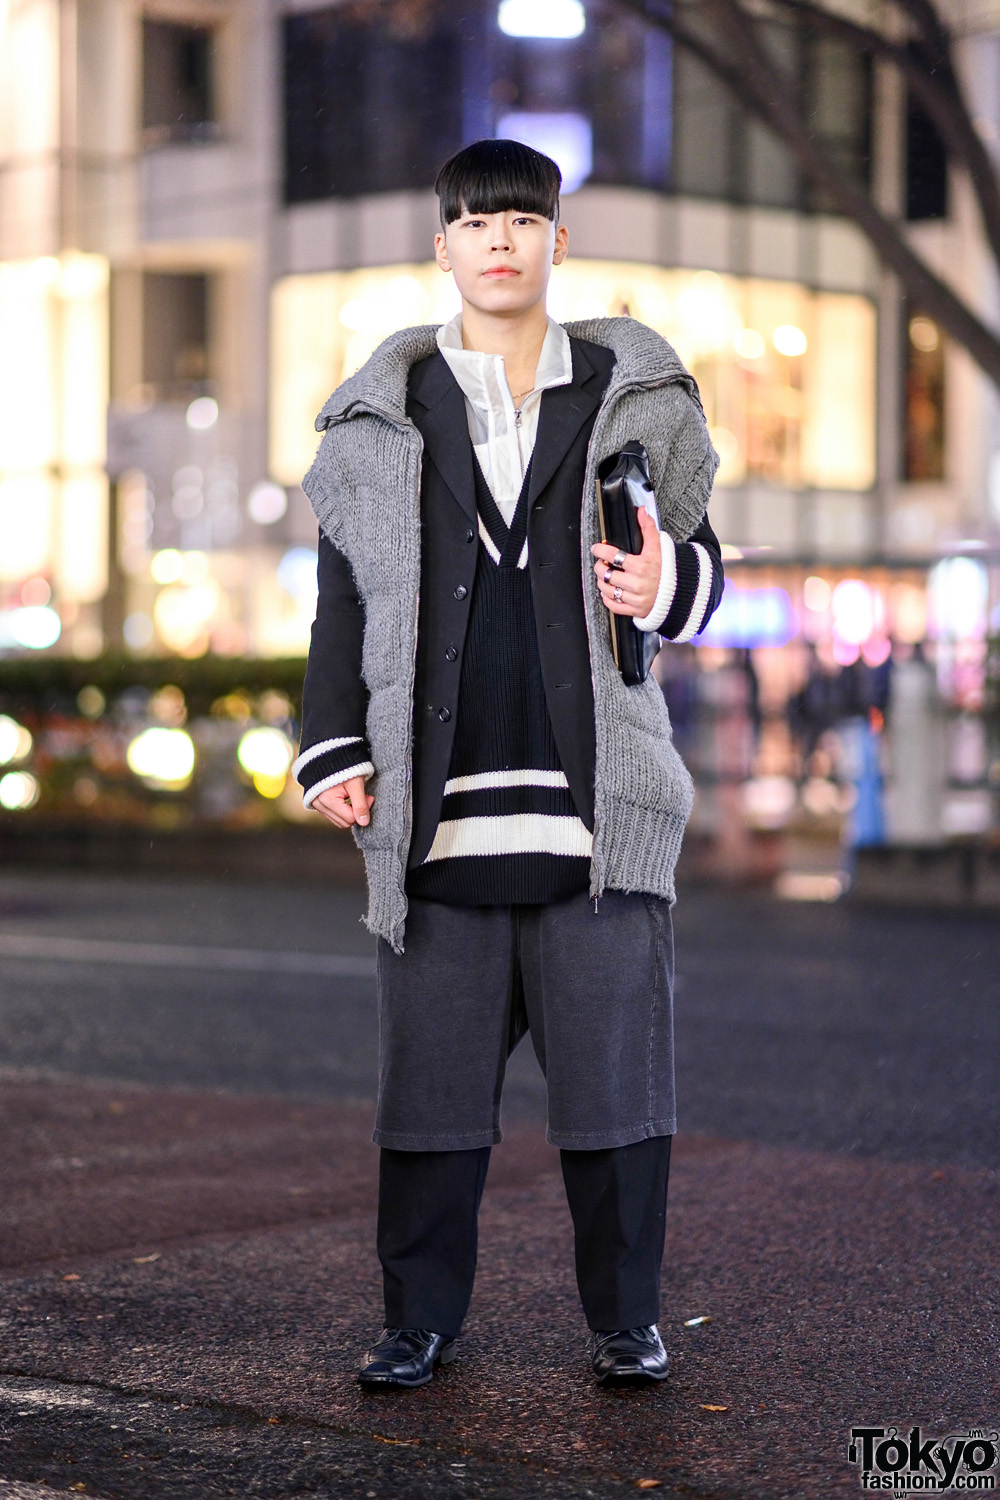 Tokyo Monochrome Layered Street Style w/ Oversized Collar Knit Vest, Blazer, Shorts Over Pants, Leather Lace-Up Loafers & Envelope Clutch